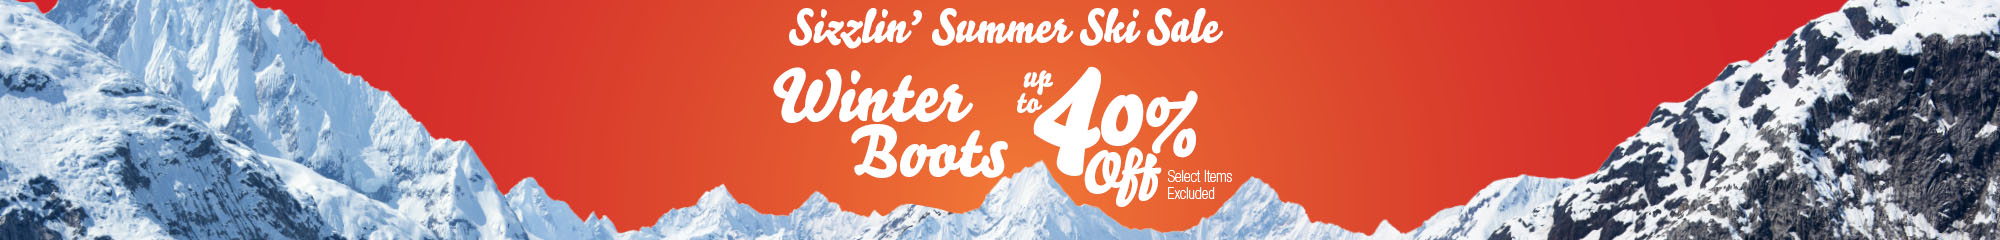 Winter boots up to 40% off